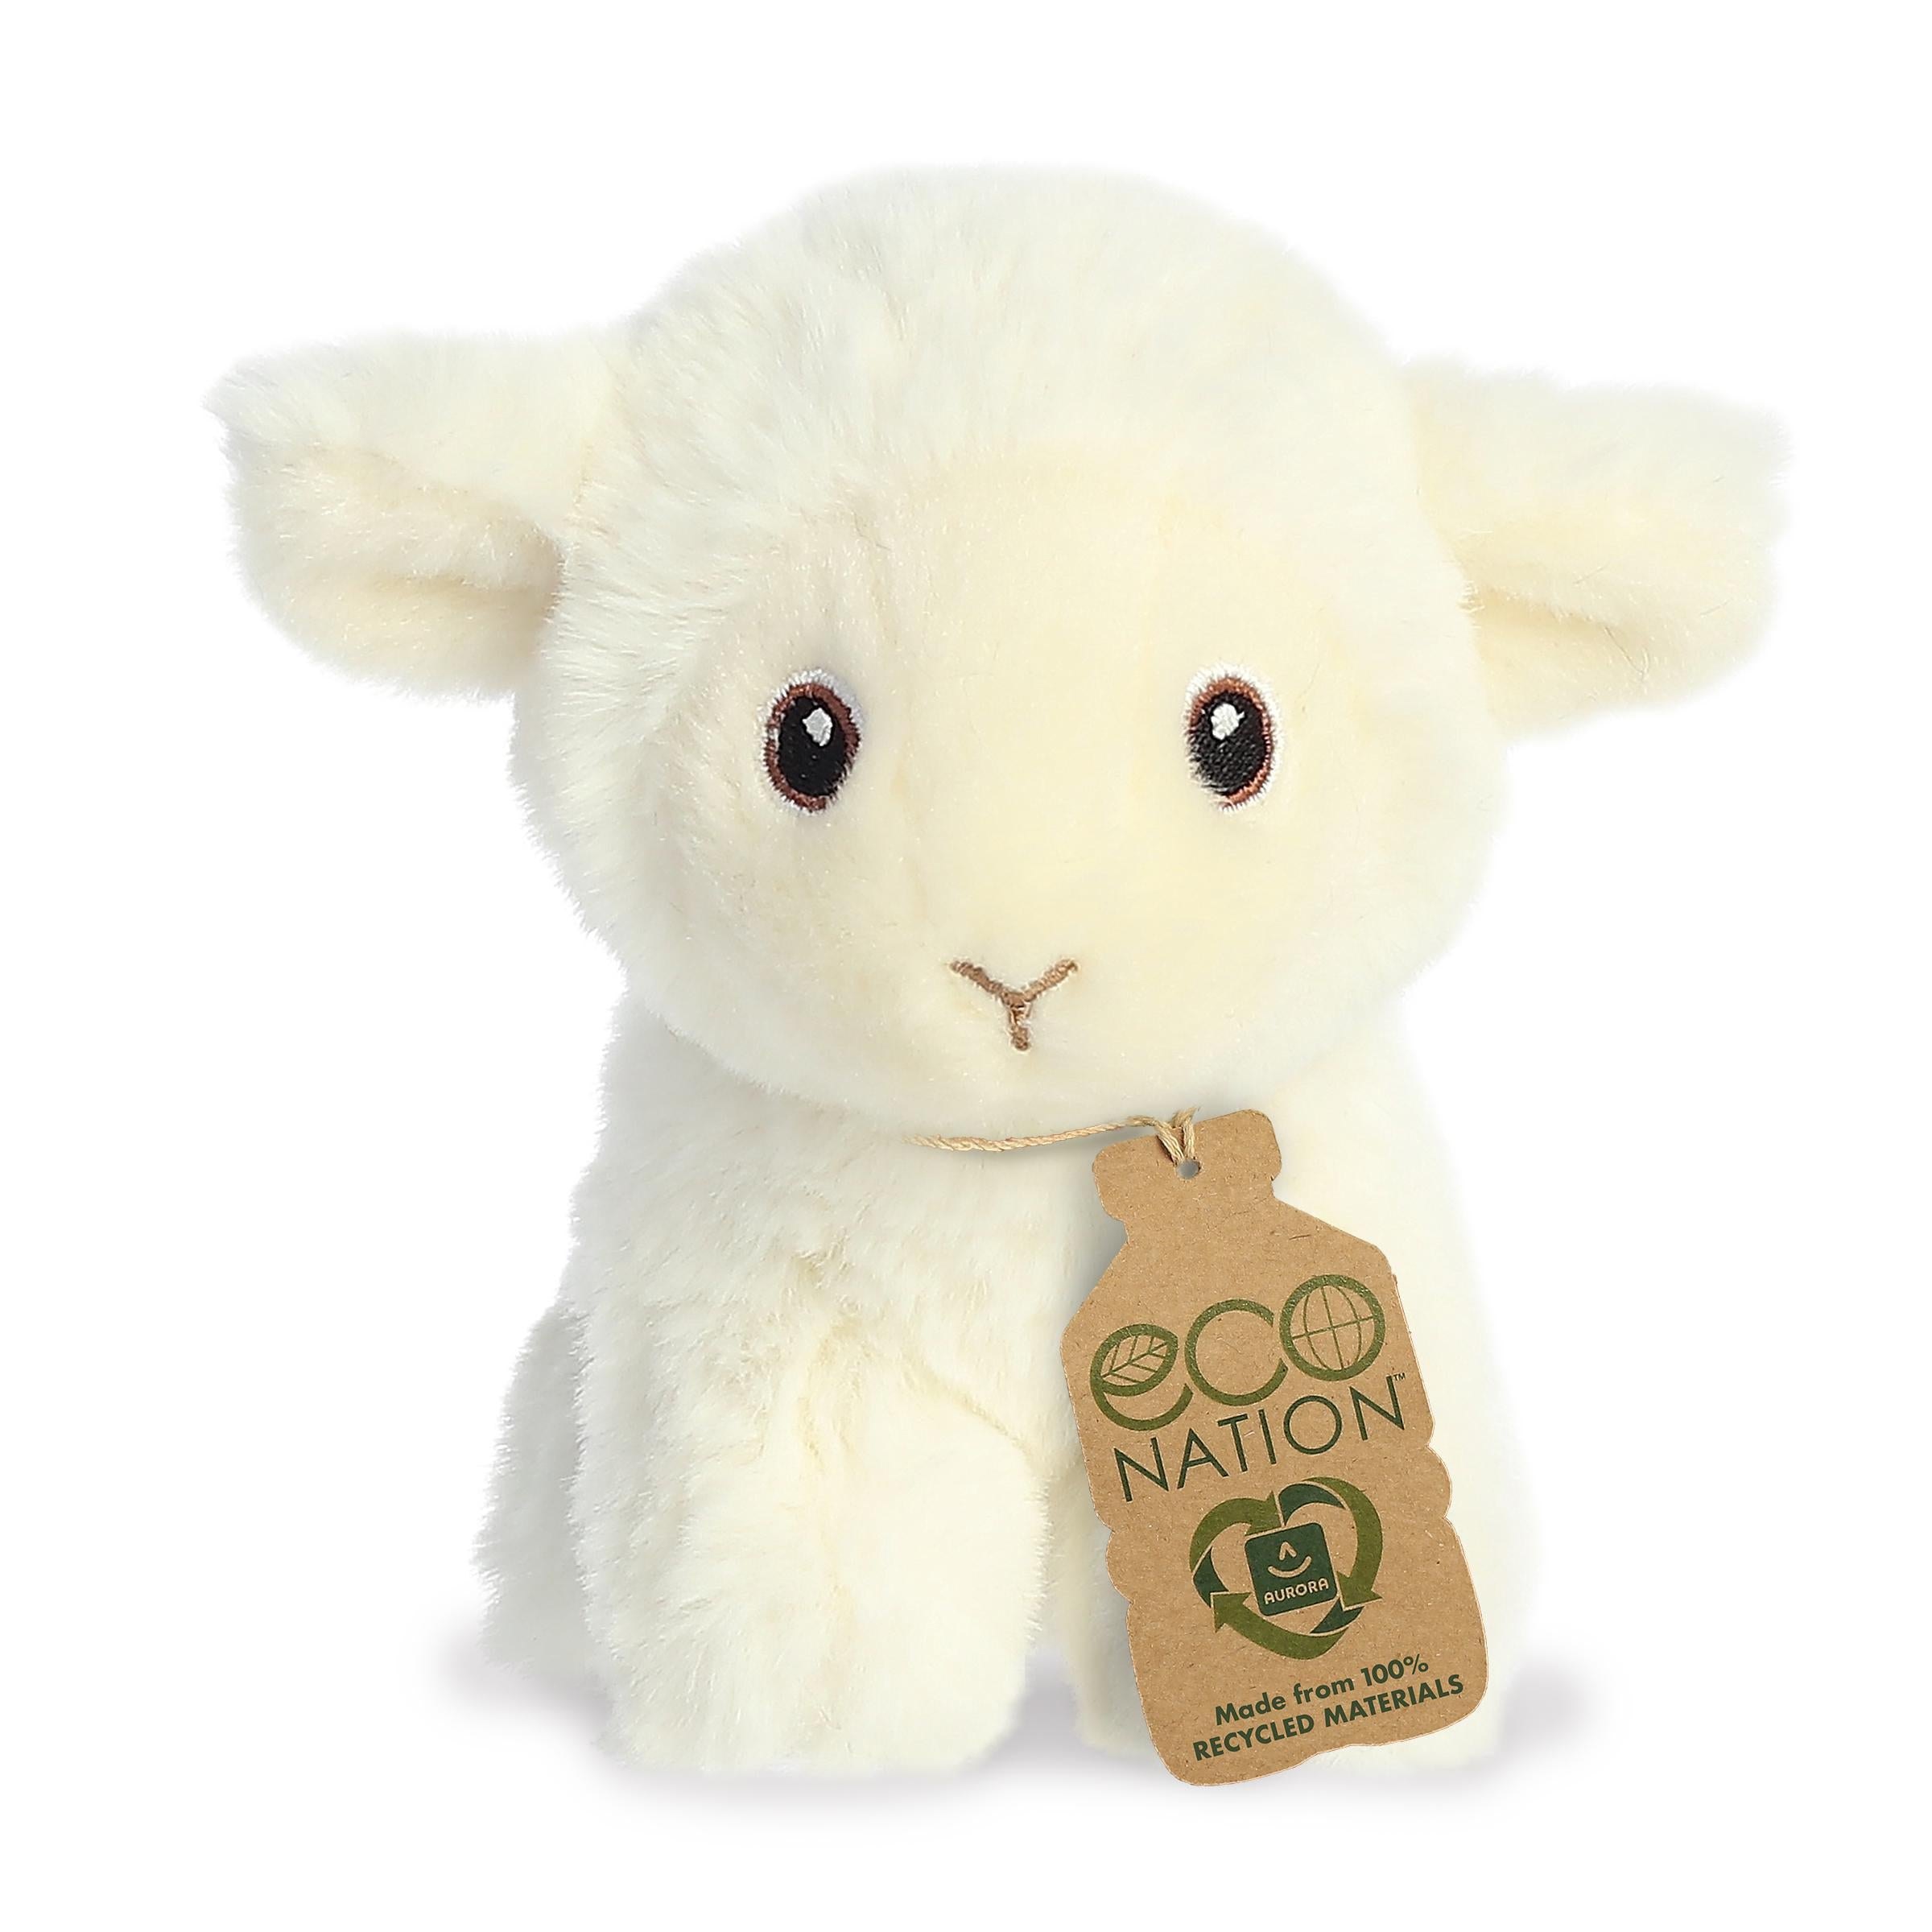 Adorable mini lamb plush with a white cloudlike coat of softness, innocent embroidered eyes, and an eco-nation tag